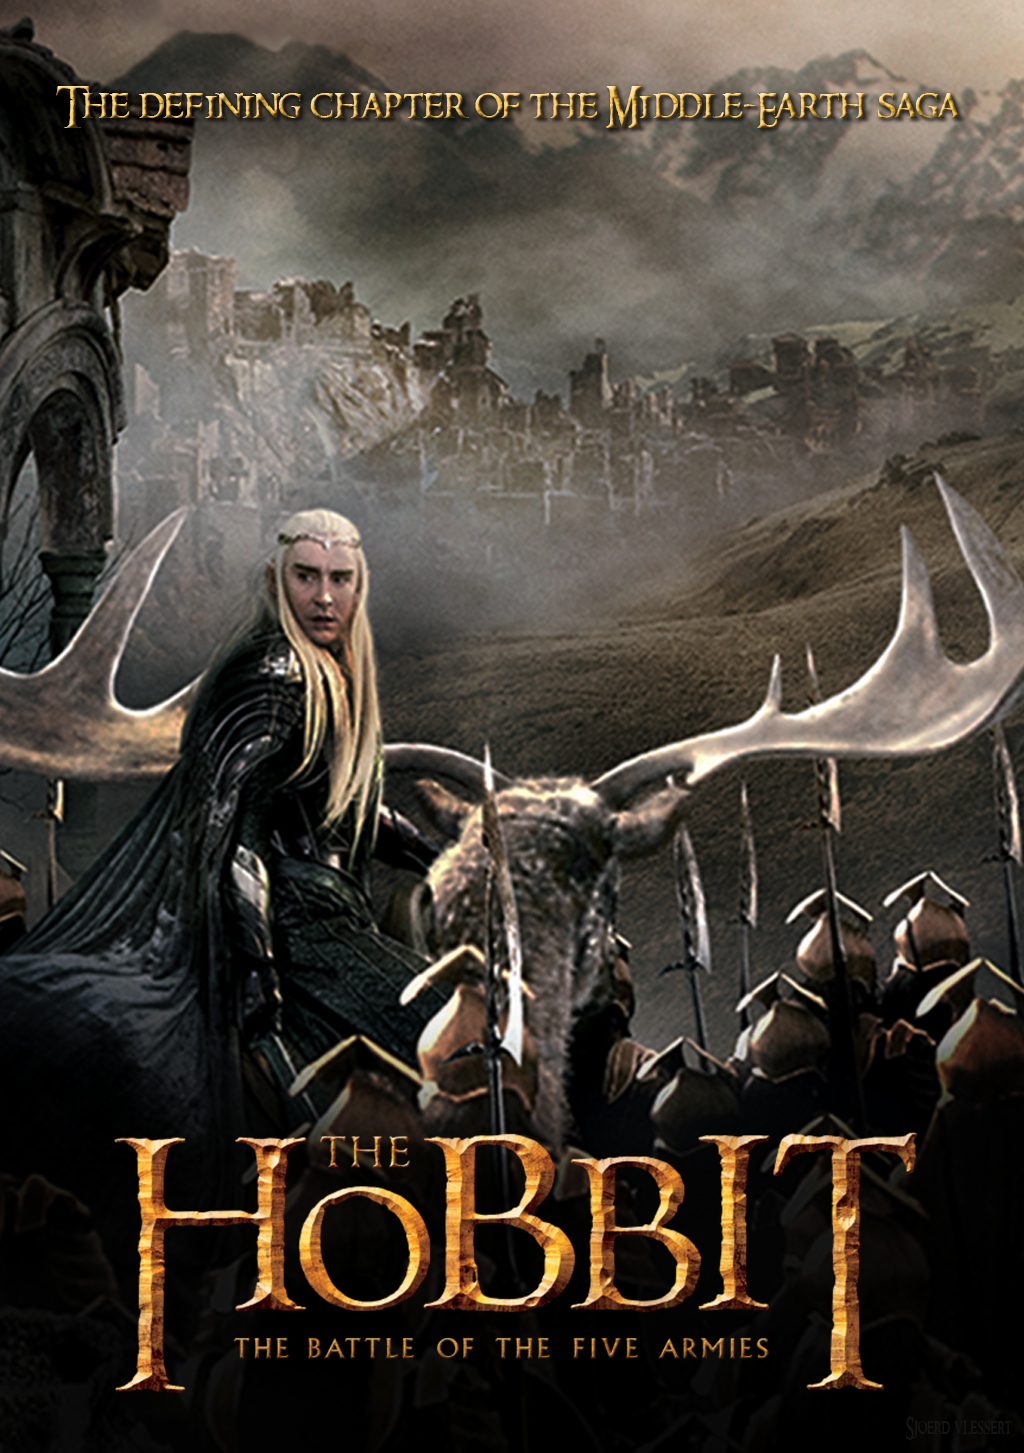 The Hobbit The Battle Of The Five Armies Wallpapers Movie Hq The Hobbit The Battle Of The Five Armies Pictures 4k Wallpapers 2019